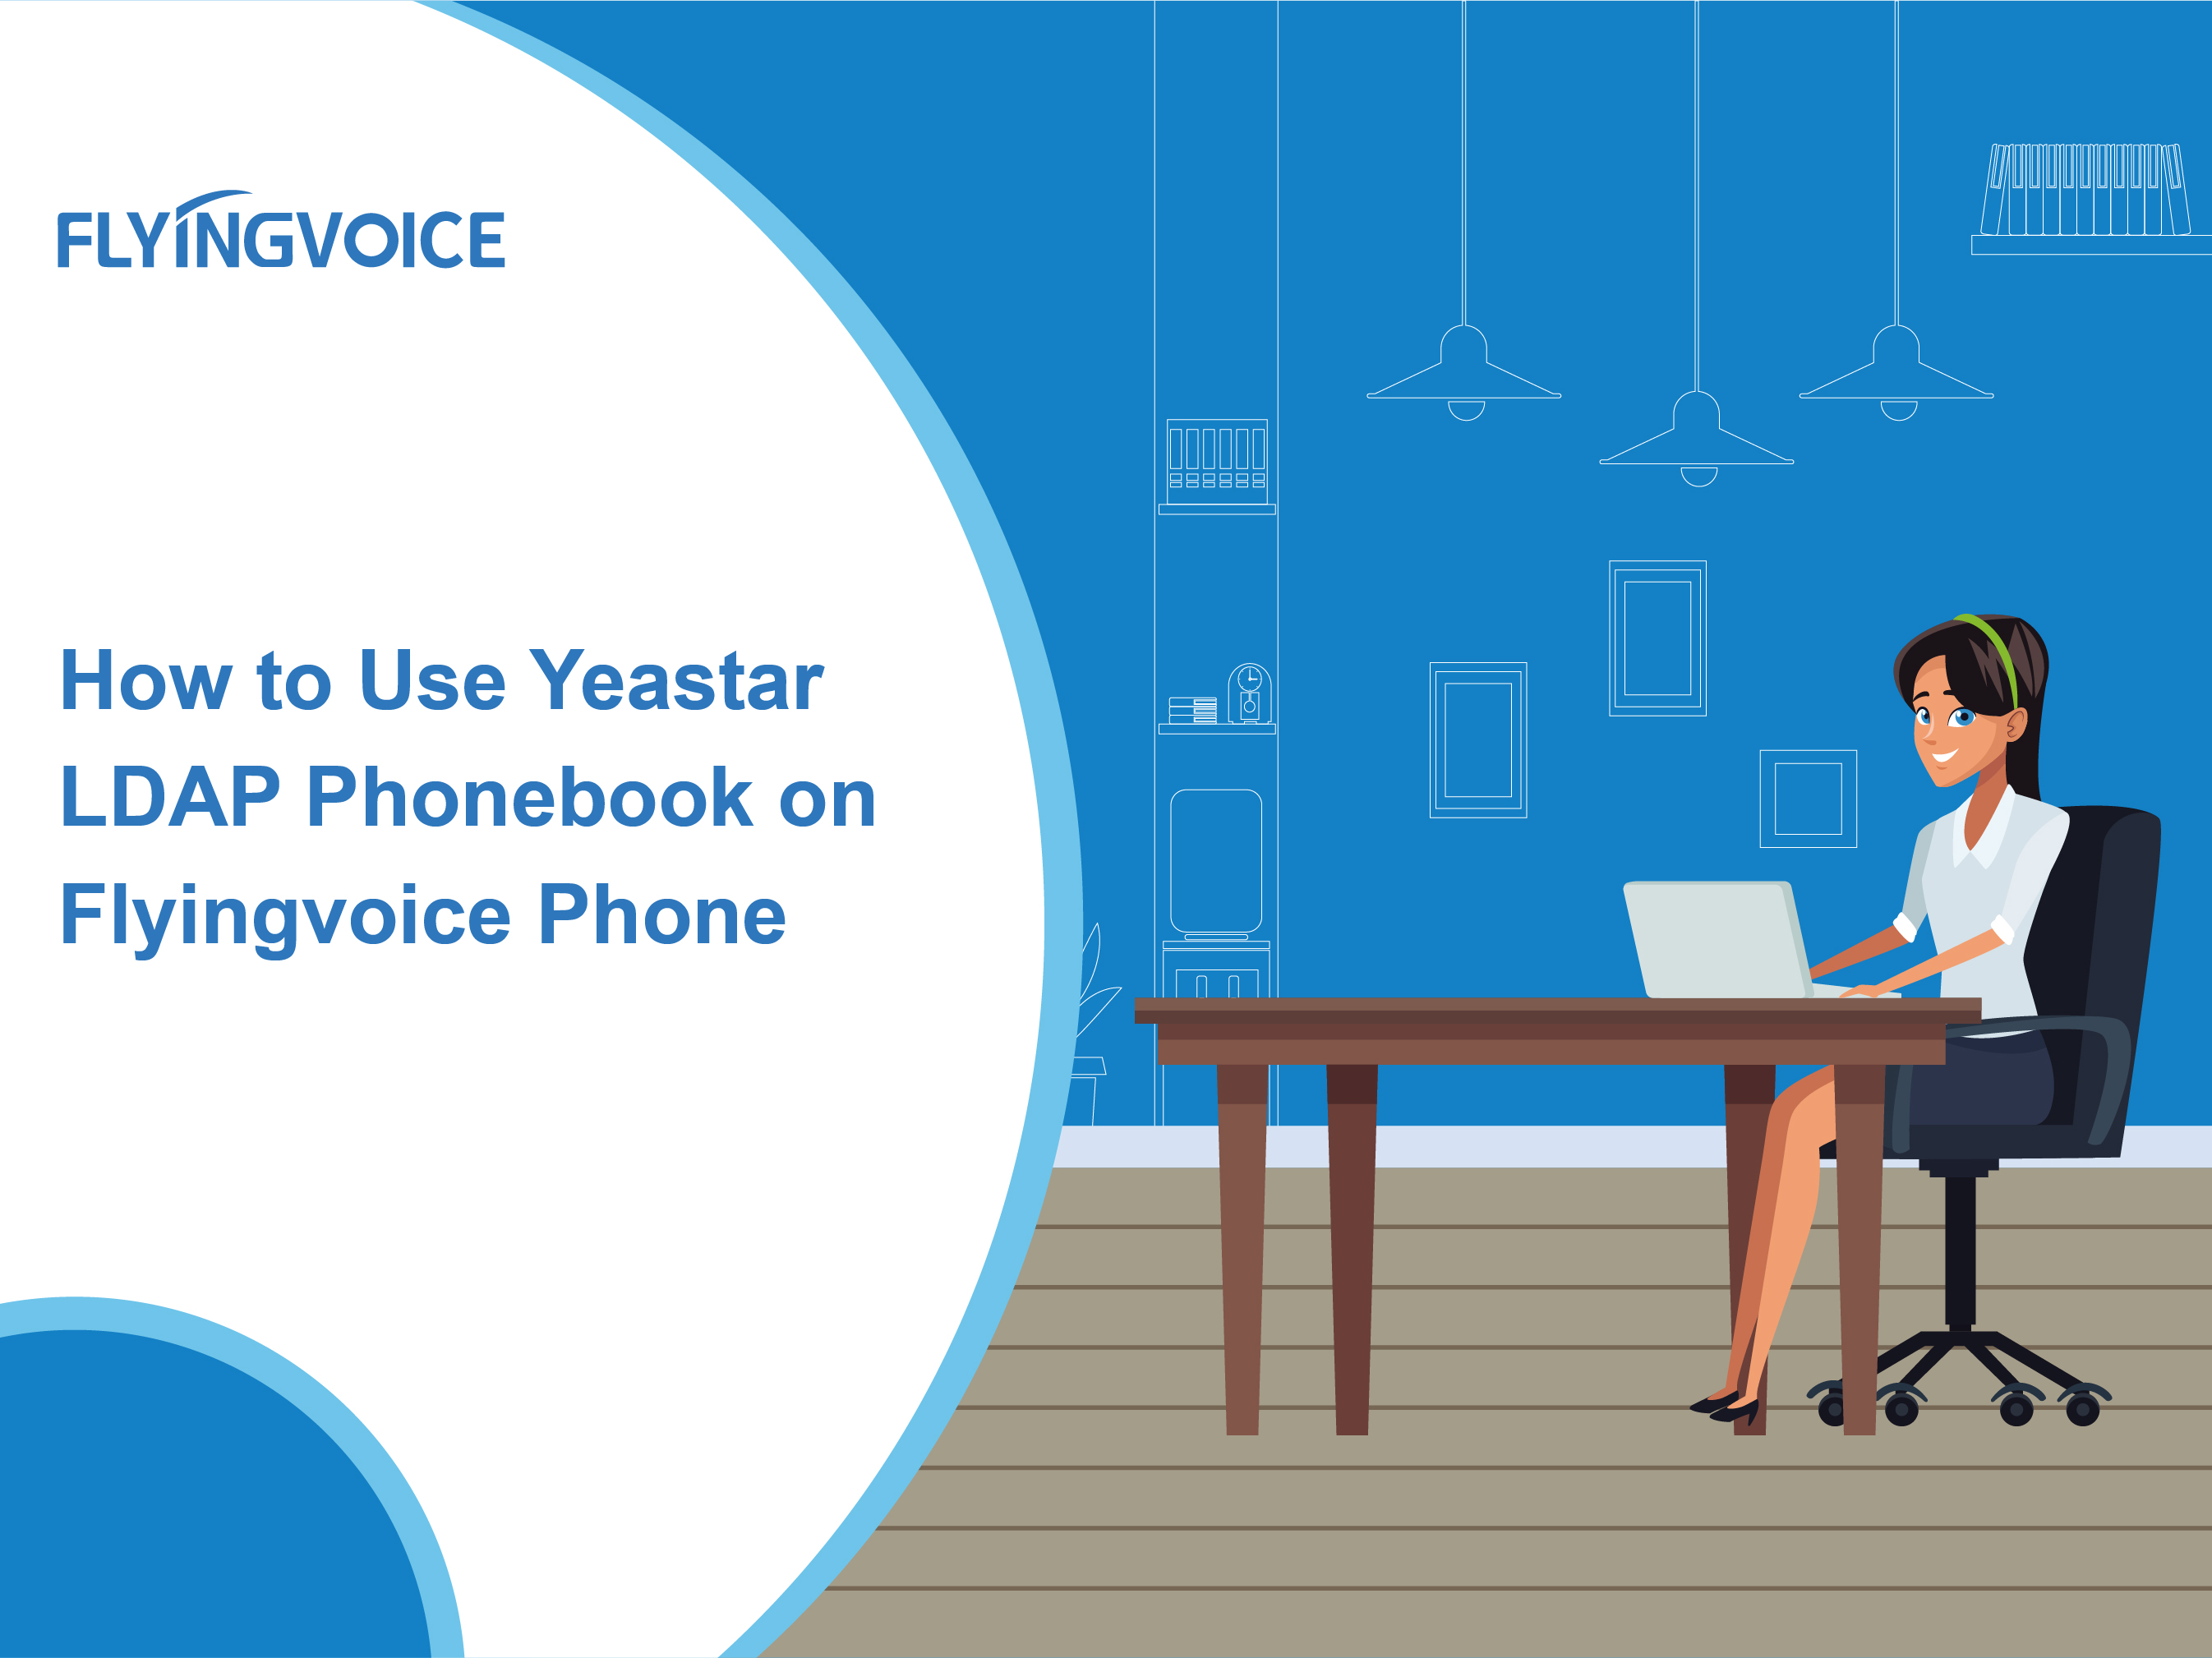 How to use Yeastar LDAP Phonebook on Flyingvoice Phone